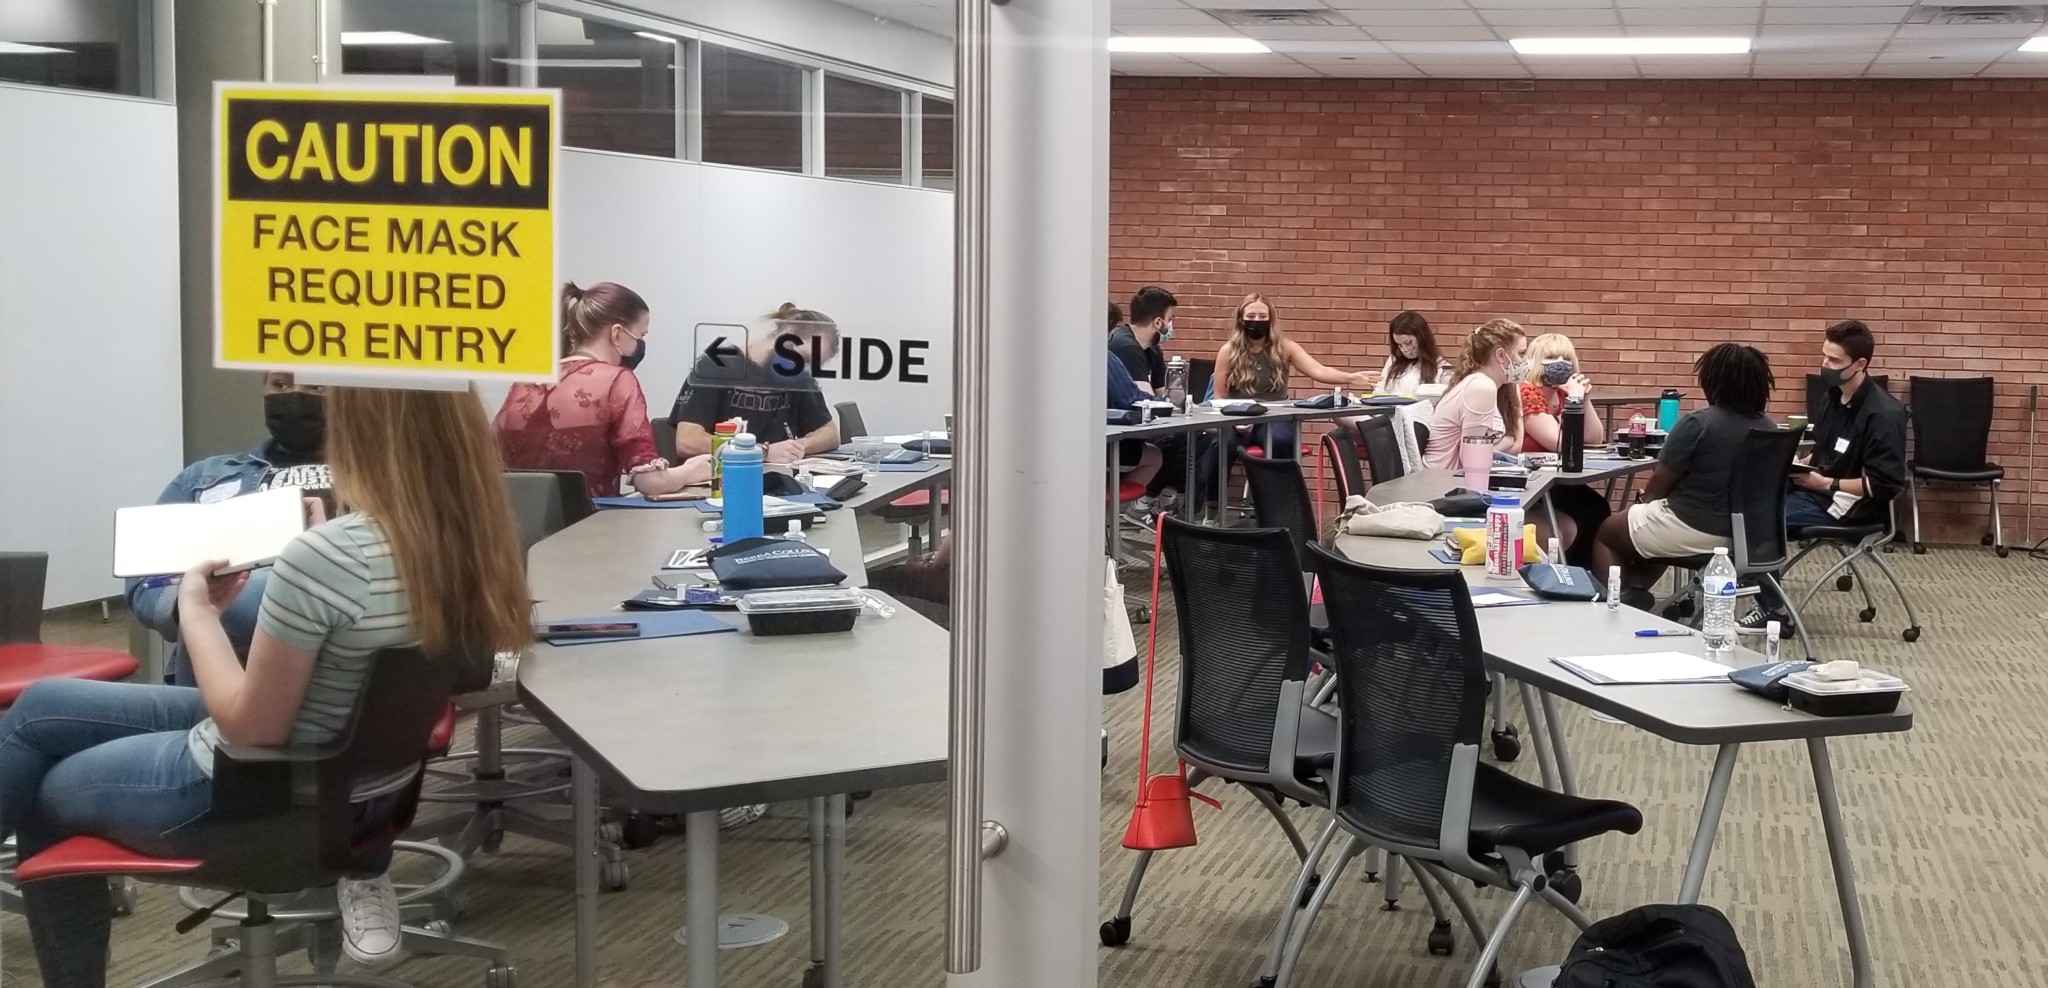 20 college students are in a classroom, divided into groups. They are working together. Some are writing. Some are talking. Some are listening.